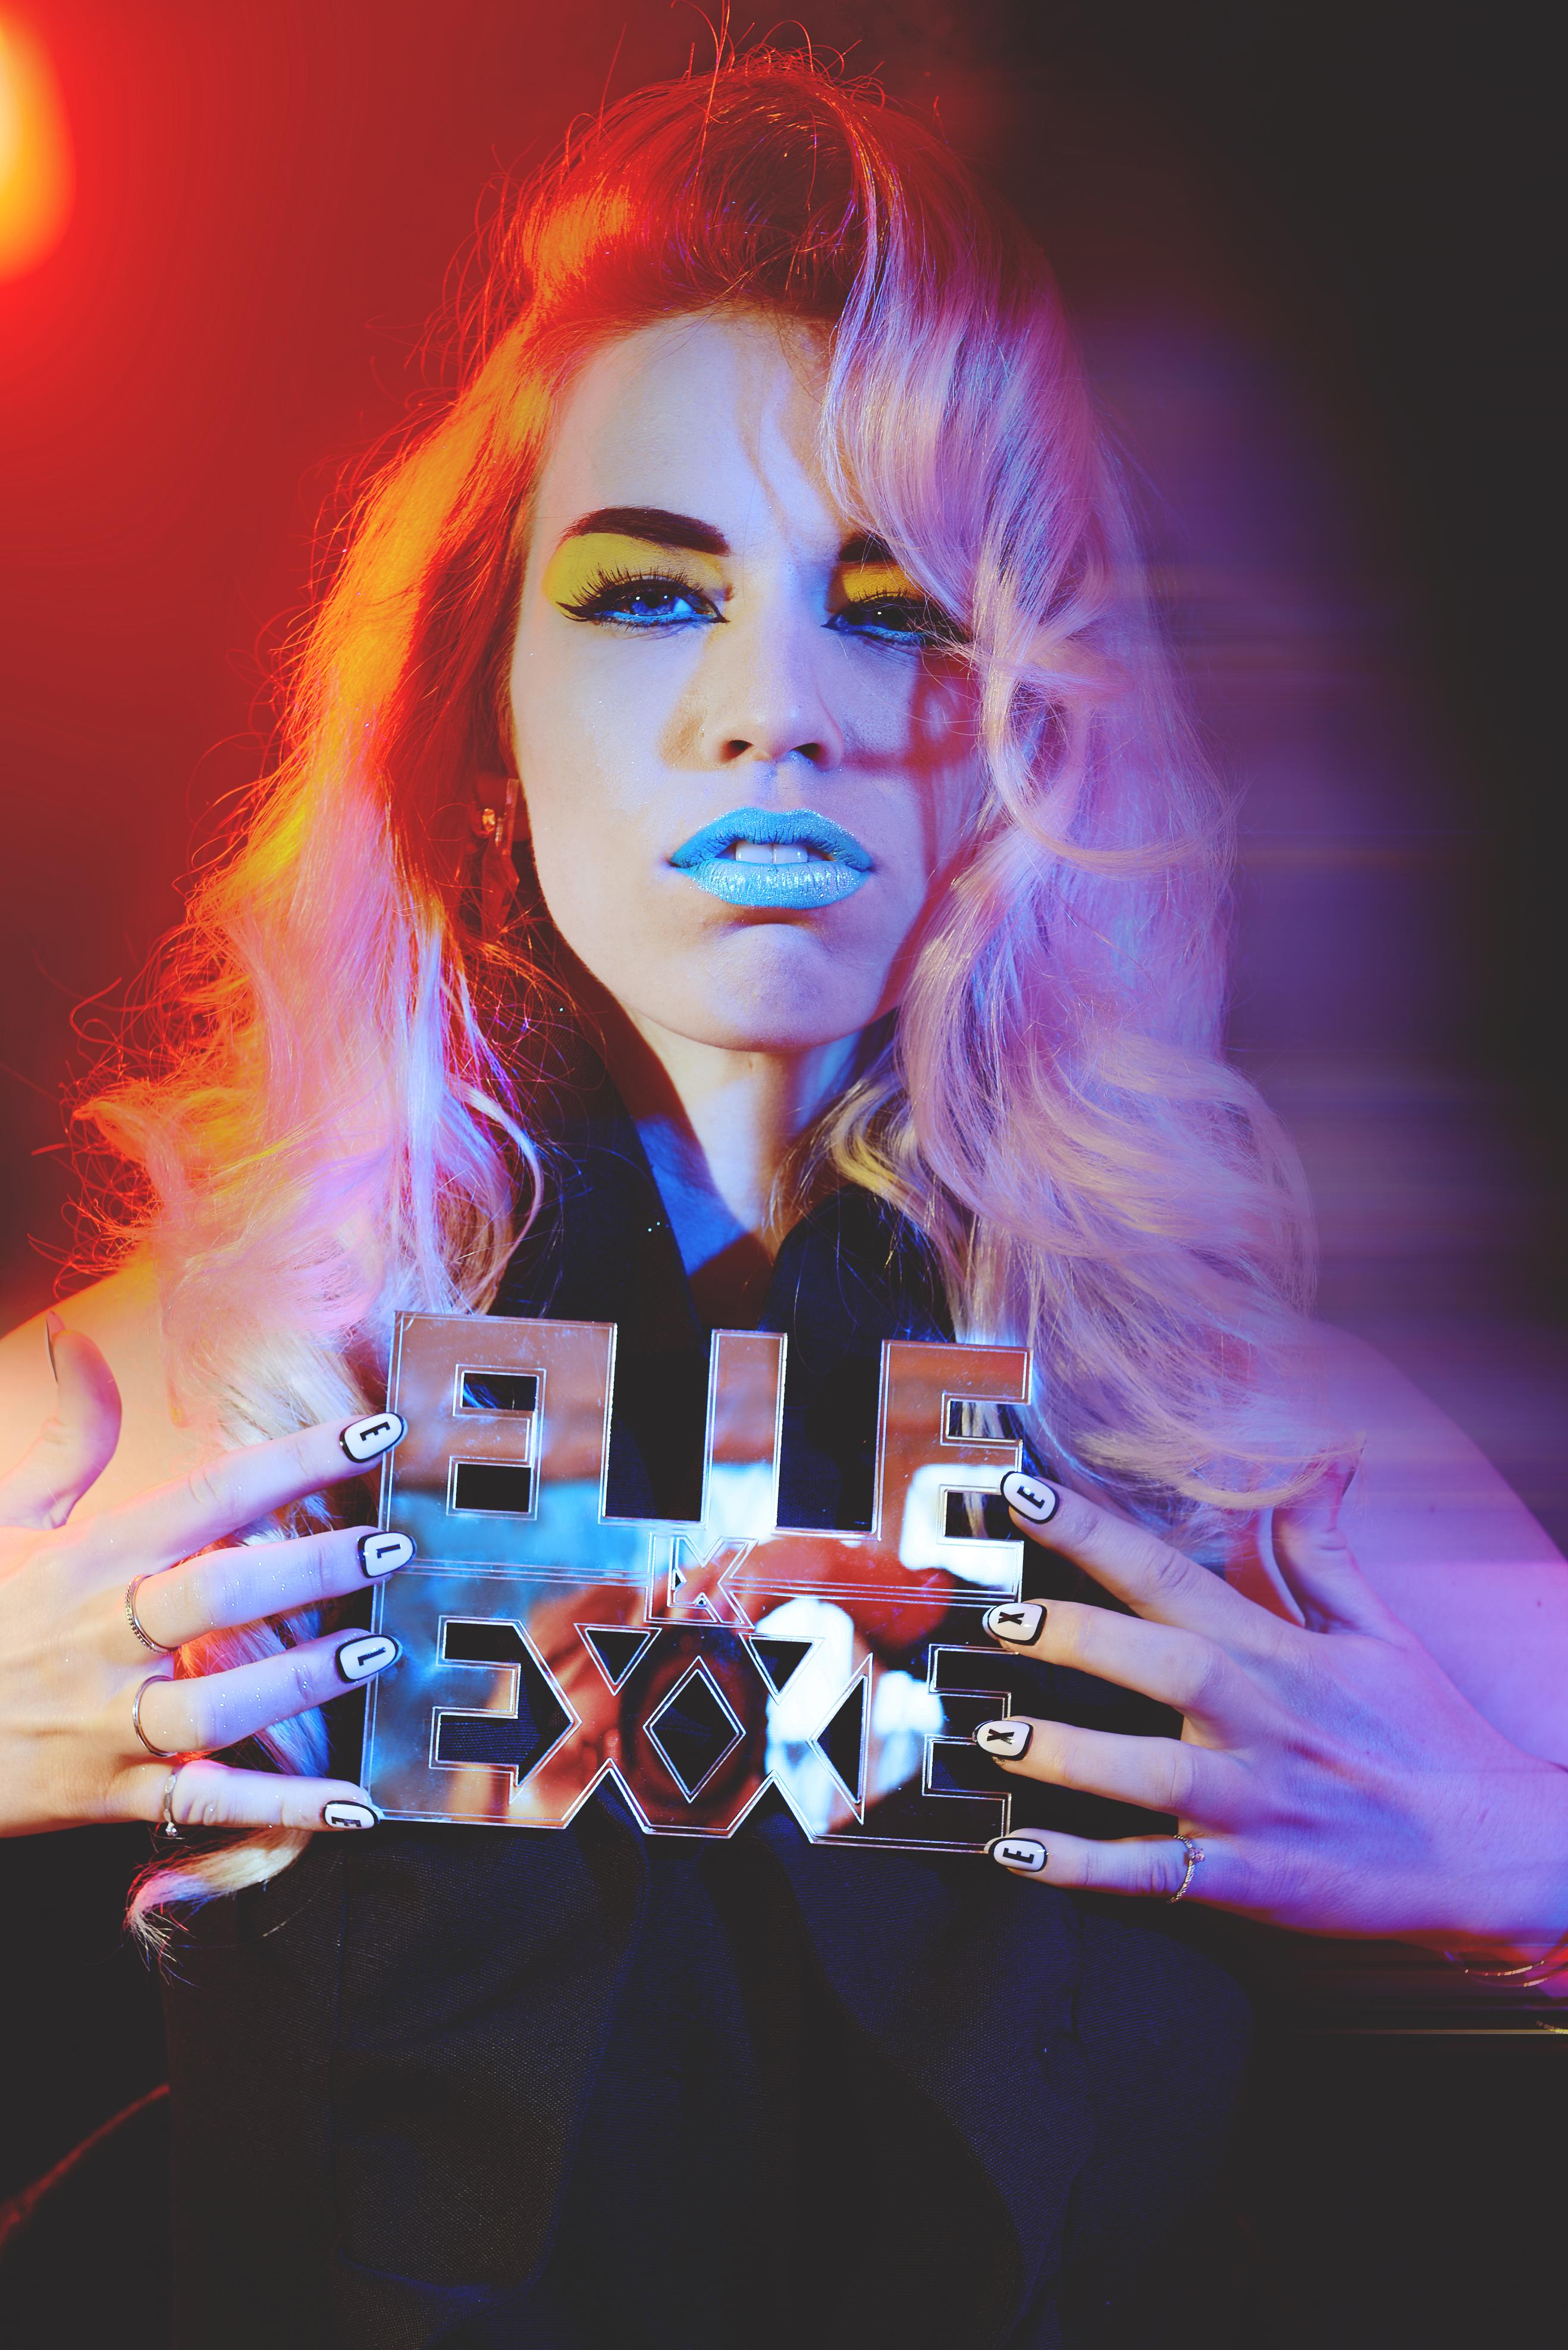 Elle Exxe releases ‘Lost In L.A.’ music video